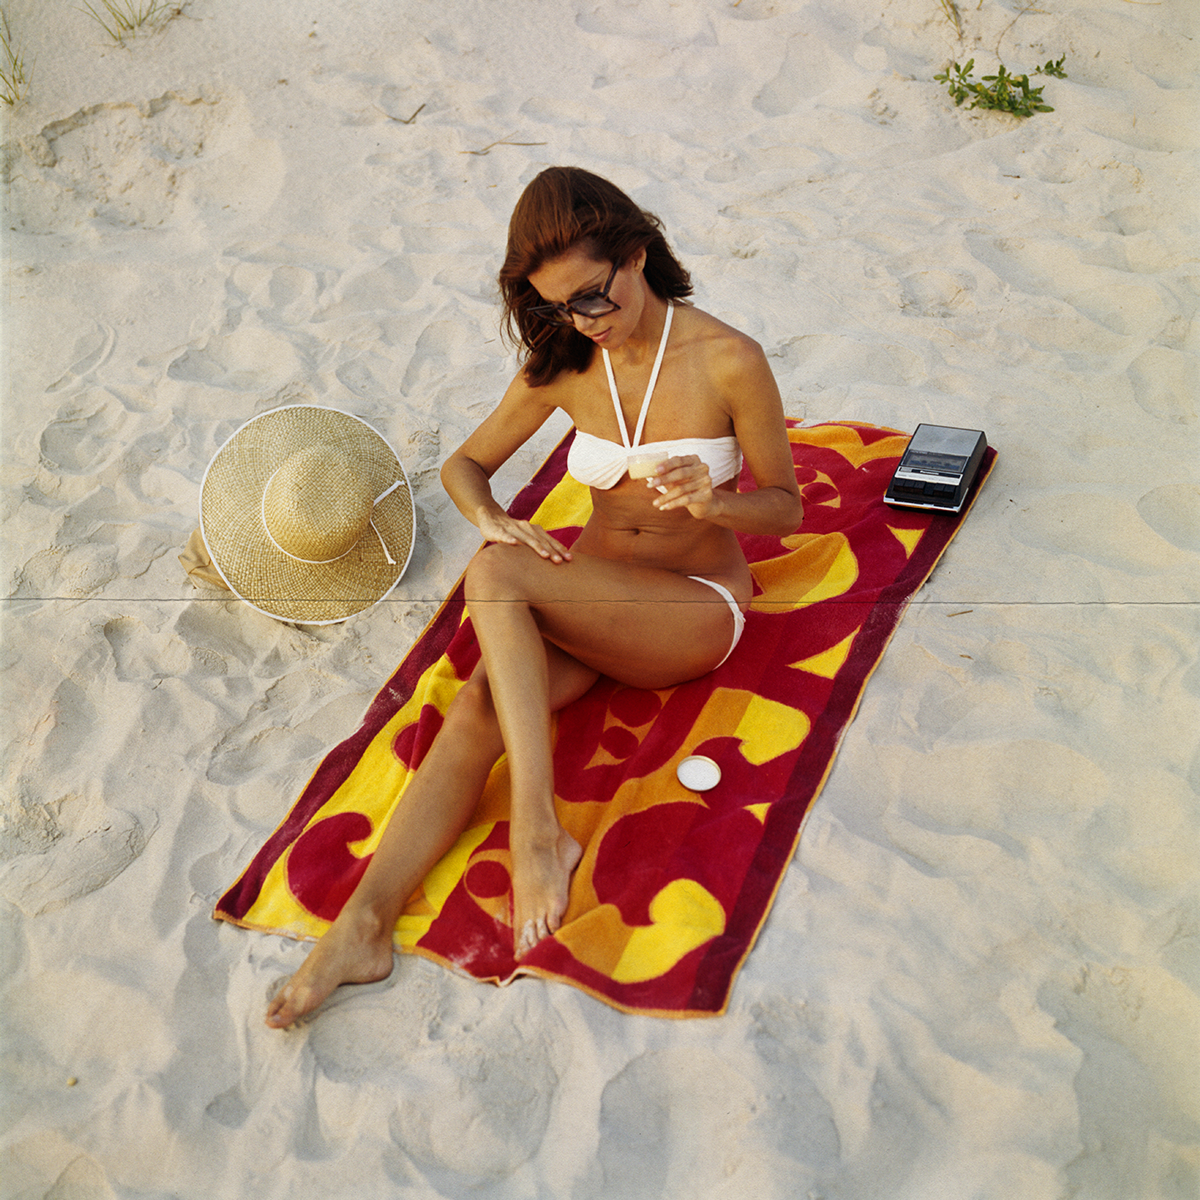 The 12 Best Beach Towels to Plunk Your Sandy Cheeks Down on This Summer